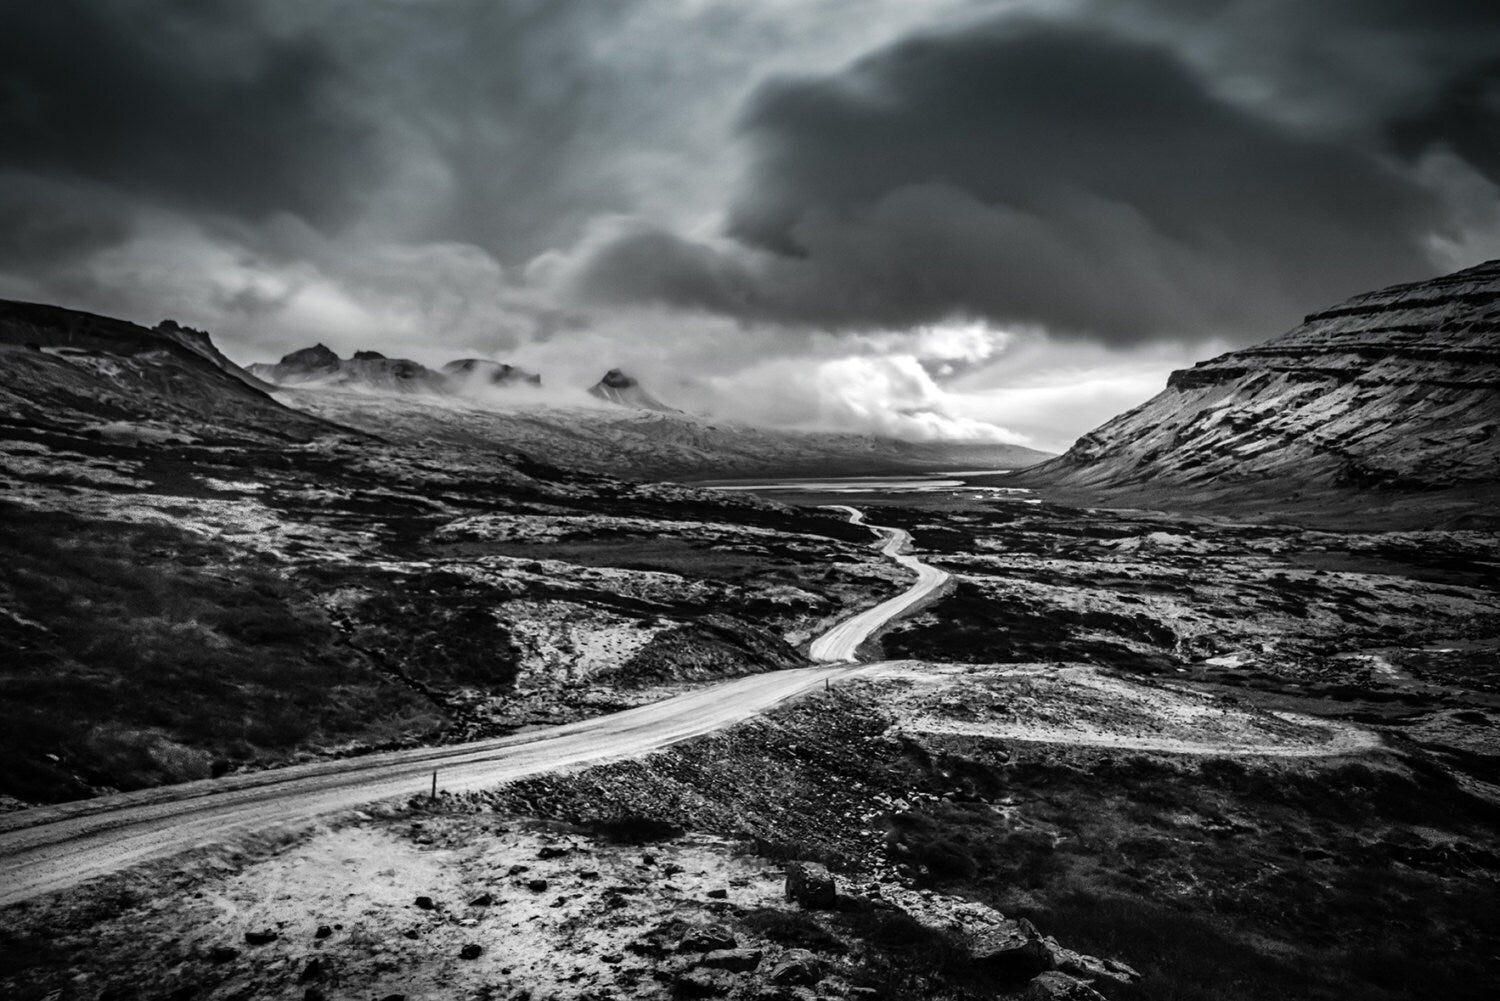 Iceland Art, Ring Road, Night Sky Print, Black and White Landscape Photography, Monochrome Art, Nature Prints,Hanging Clouds,Travel Pictures